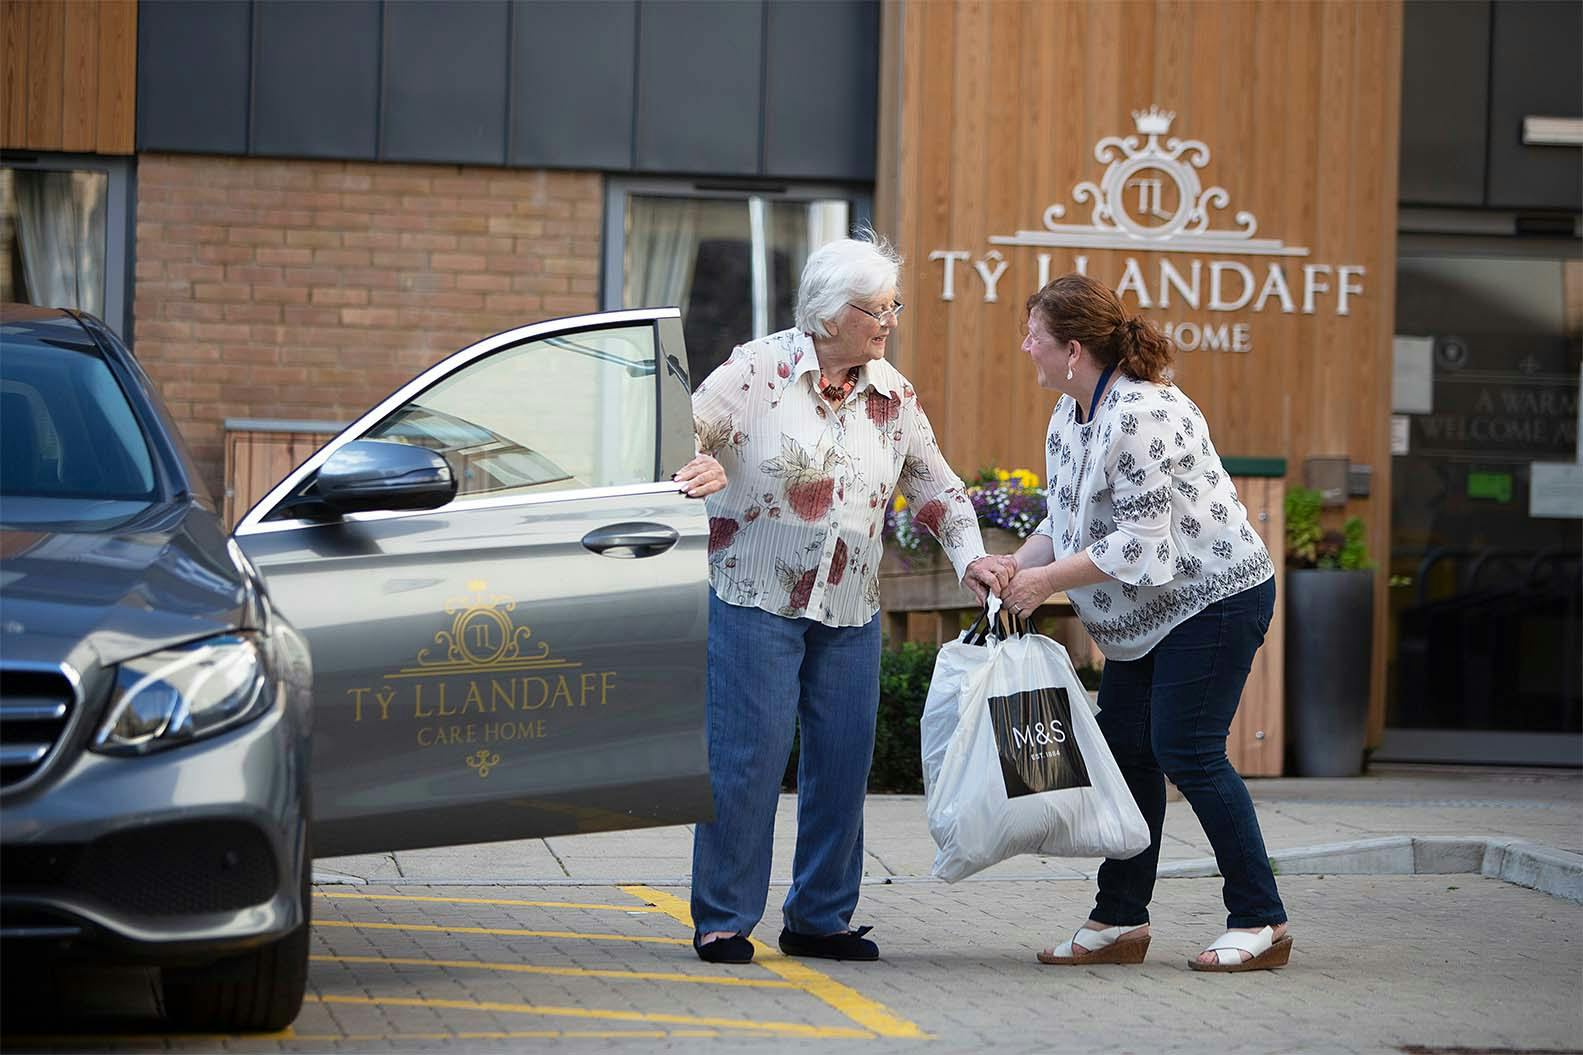 Staff Helping Resident With Shopping